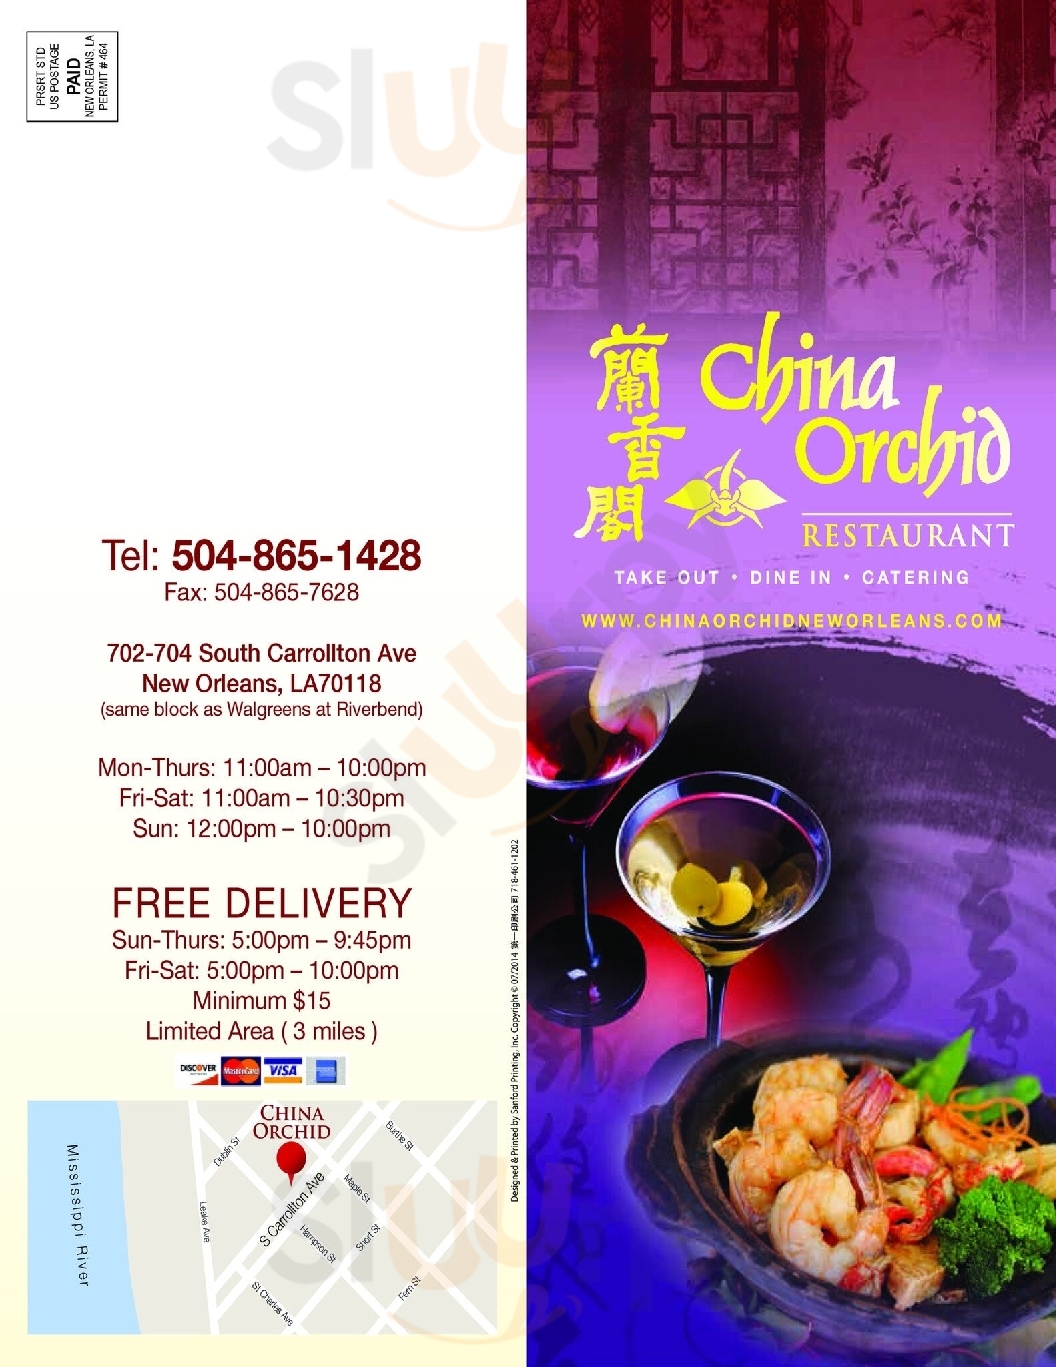 China Orchid Restaurant New Orleans Menu - 1